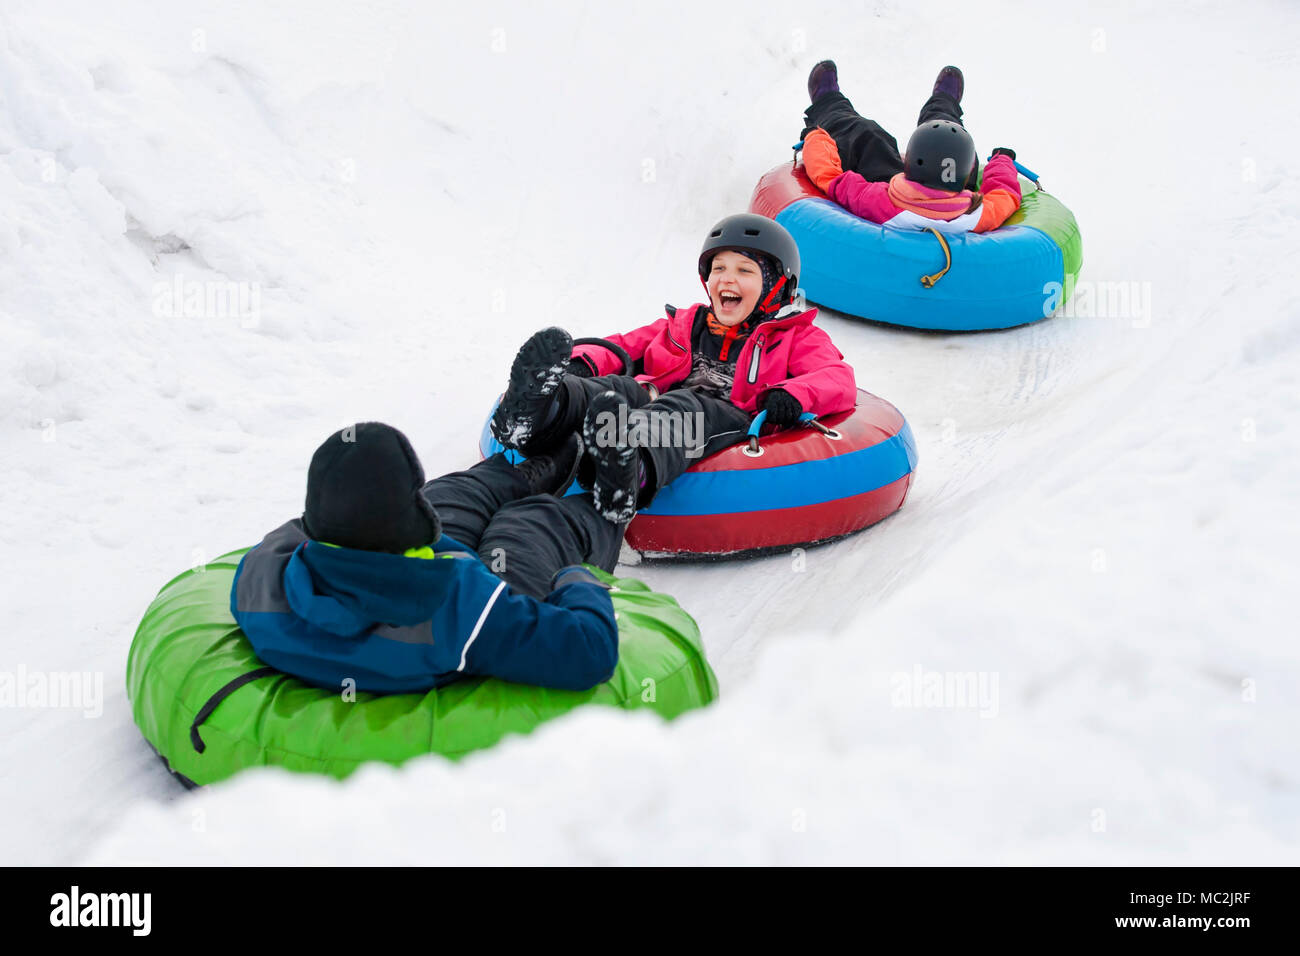 Kids on snow tubes downhill at winter day Stock Photo